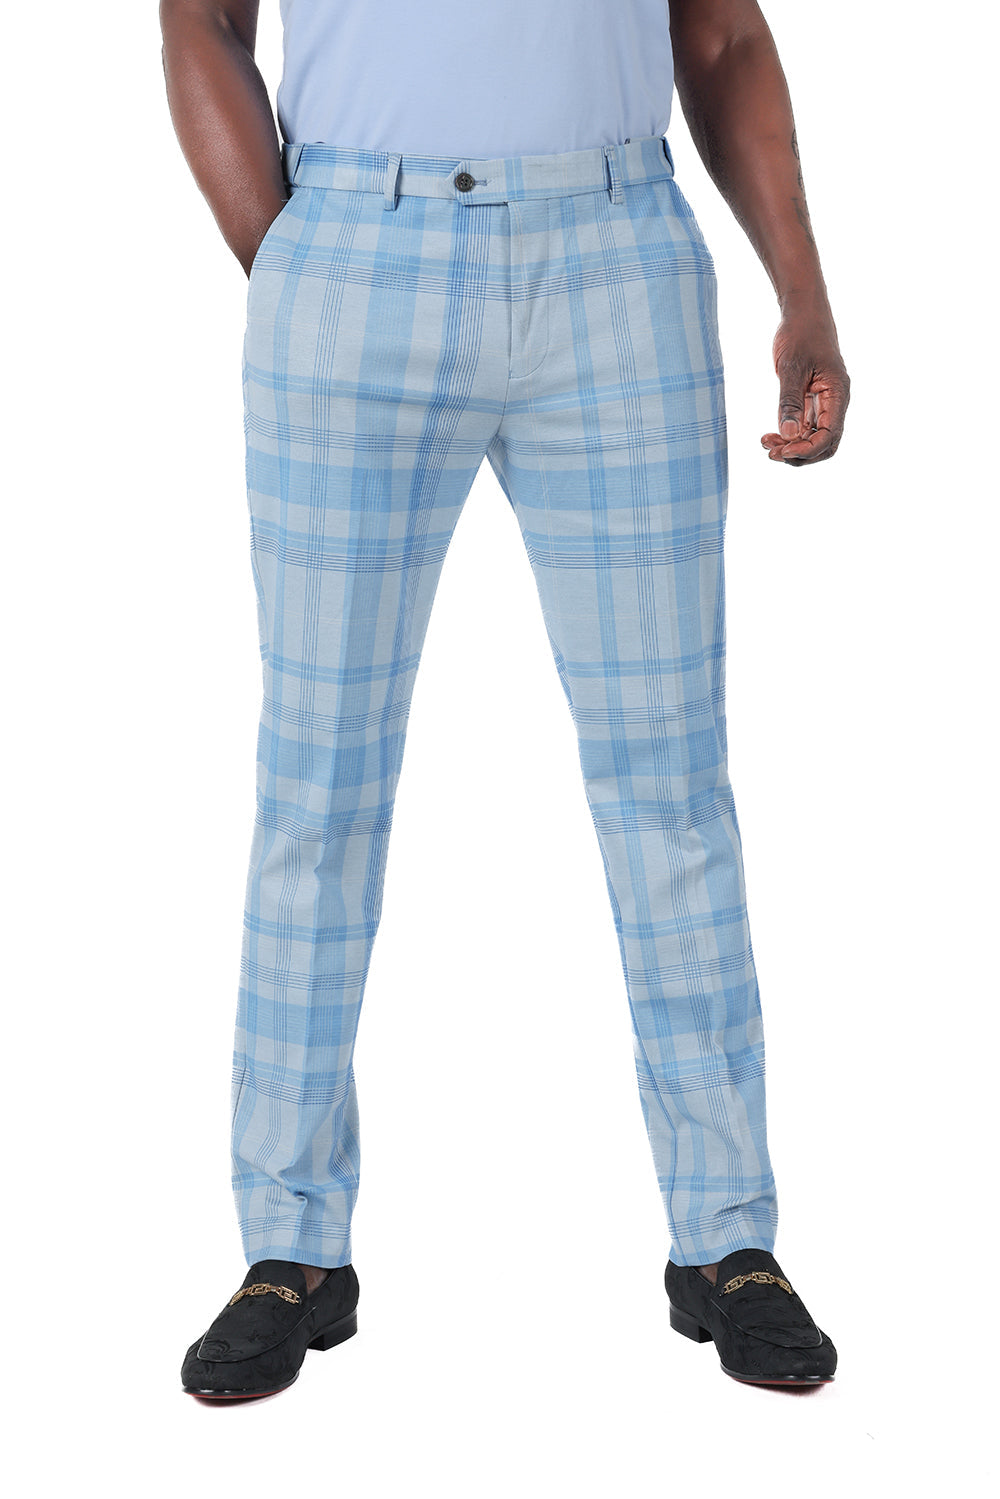 Barabas Men's Printed Checkered Design Red Sky Blue Chino Pants CP182 Sky